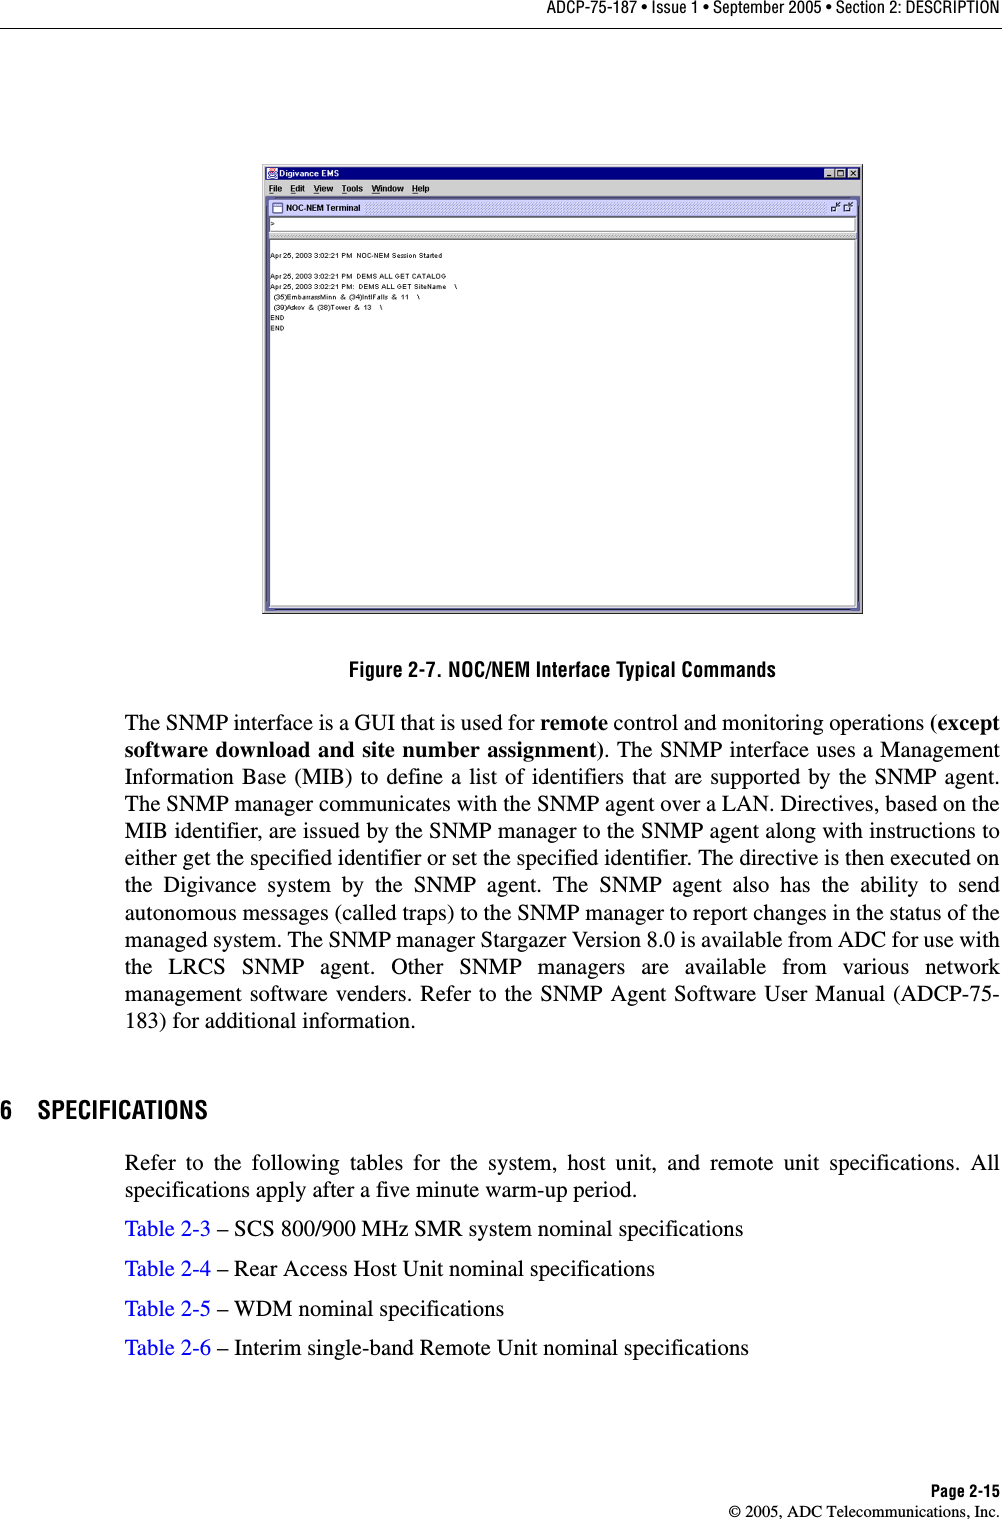 ADCP-75-187 • Issue 1 • September 2005 • Section 2: DESCRIPTIONPage 2-15© 2005, ADC Telecommunications, Inc.Figure 2-7. NOC/NEM Interface Typical CommandsThe SNMP interface is a GUI that is used for remote control and monitoring operations (exceptsoftware download and site number assignment). The SNMP interface uses a ManagementInformation Base (MIB) to define a list of identifiers that are supported by the SNMP agent.The SNMP manager communicates with the SNMP agent over a LAN. Directives, based on theMIB identifier, are issued by the SNMP manager to the SNMP agent along with instructions toeither get the specified identifier or set the specified identifier. The directive is then executed onthe Digivance system by the SNMP agent. The SNMP agent also has the ability to sendautonomous messages (called traps) to the SNMP manager to report changes in the status of themanaged system. The SNMP manager Stargazer Version 8.0 is available from ADC for use withthe LRCS SNMP agent. Other SNMP managers are available from various networkmanagement software venders. Refer to the SNMP Agent Software User Manual (ADCP-75-183) for additional information. 6 SPECIFICATIONSRefer to the following tables for the system, host unit, and remote unit specifications. Allspecifications apply after a five minute warm-up period. Table 2-3 – SCS 800/900 MHz SMR system nominal specificationsTable 2-4 – Rear Access Host Unit nominal specificationsTable 2-5 – WDM nominal specificationsTable 2-6 – Interim single-band Remote Unit nominal specifications